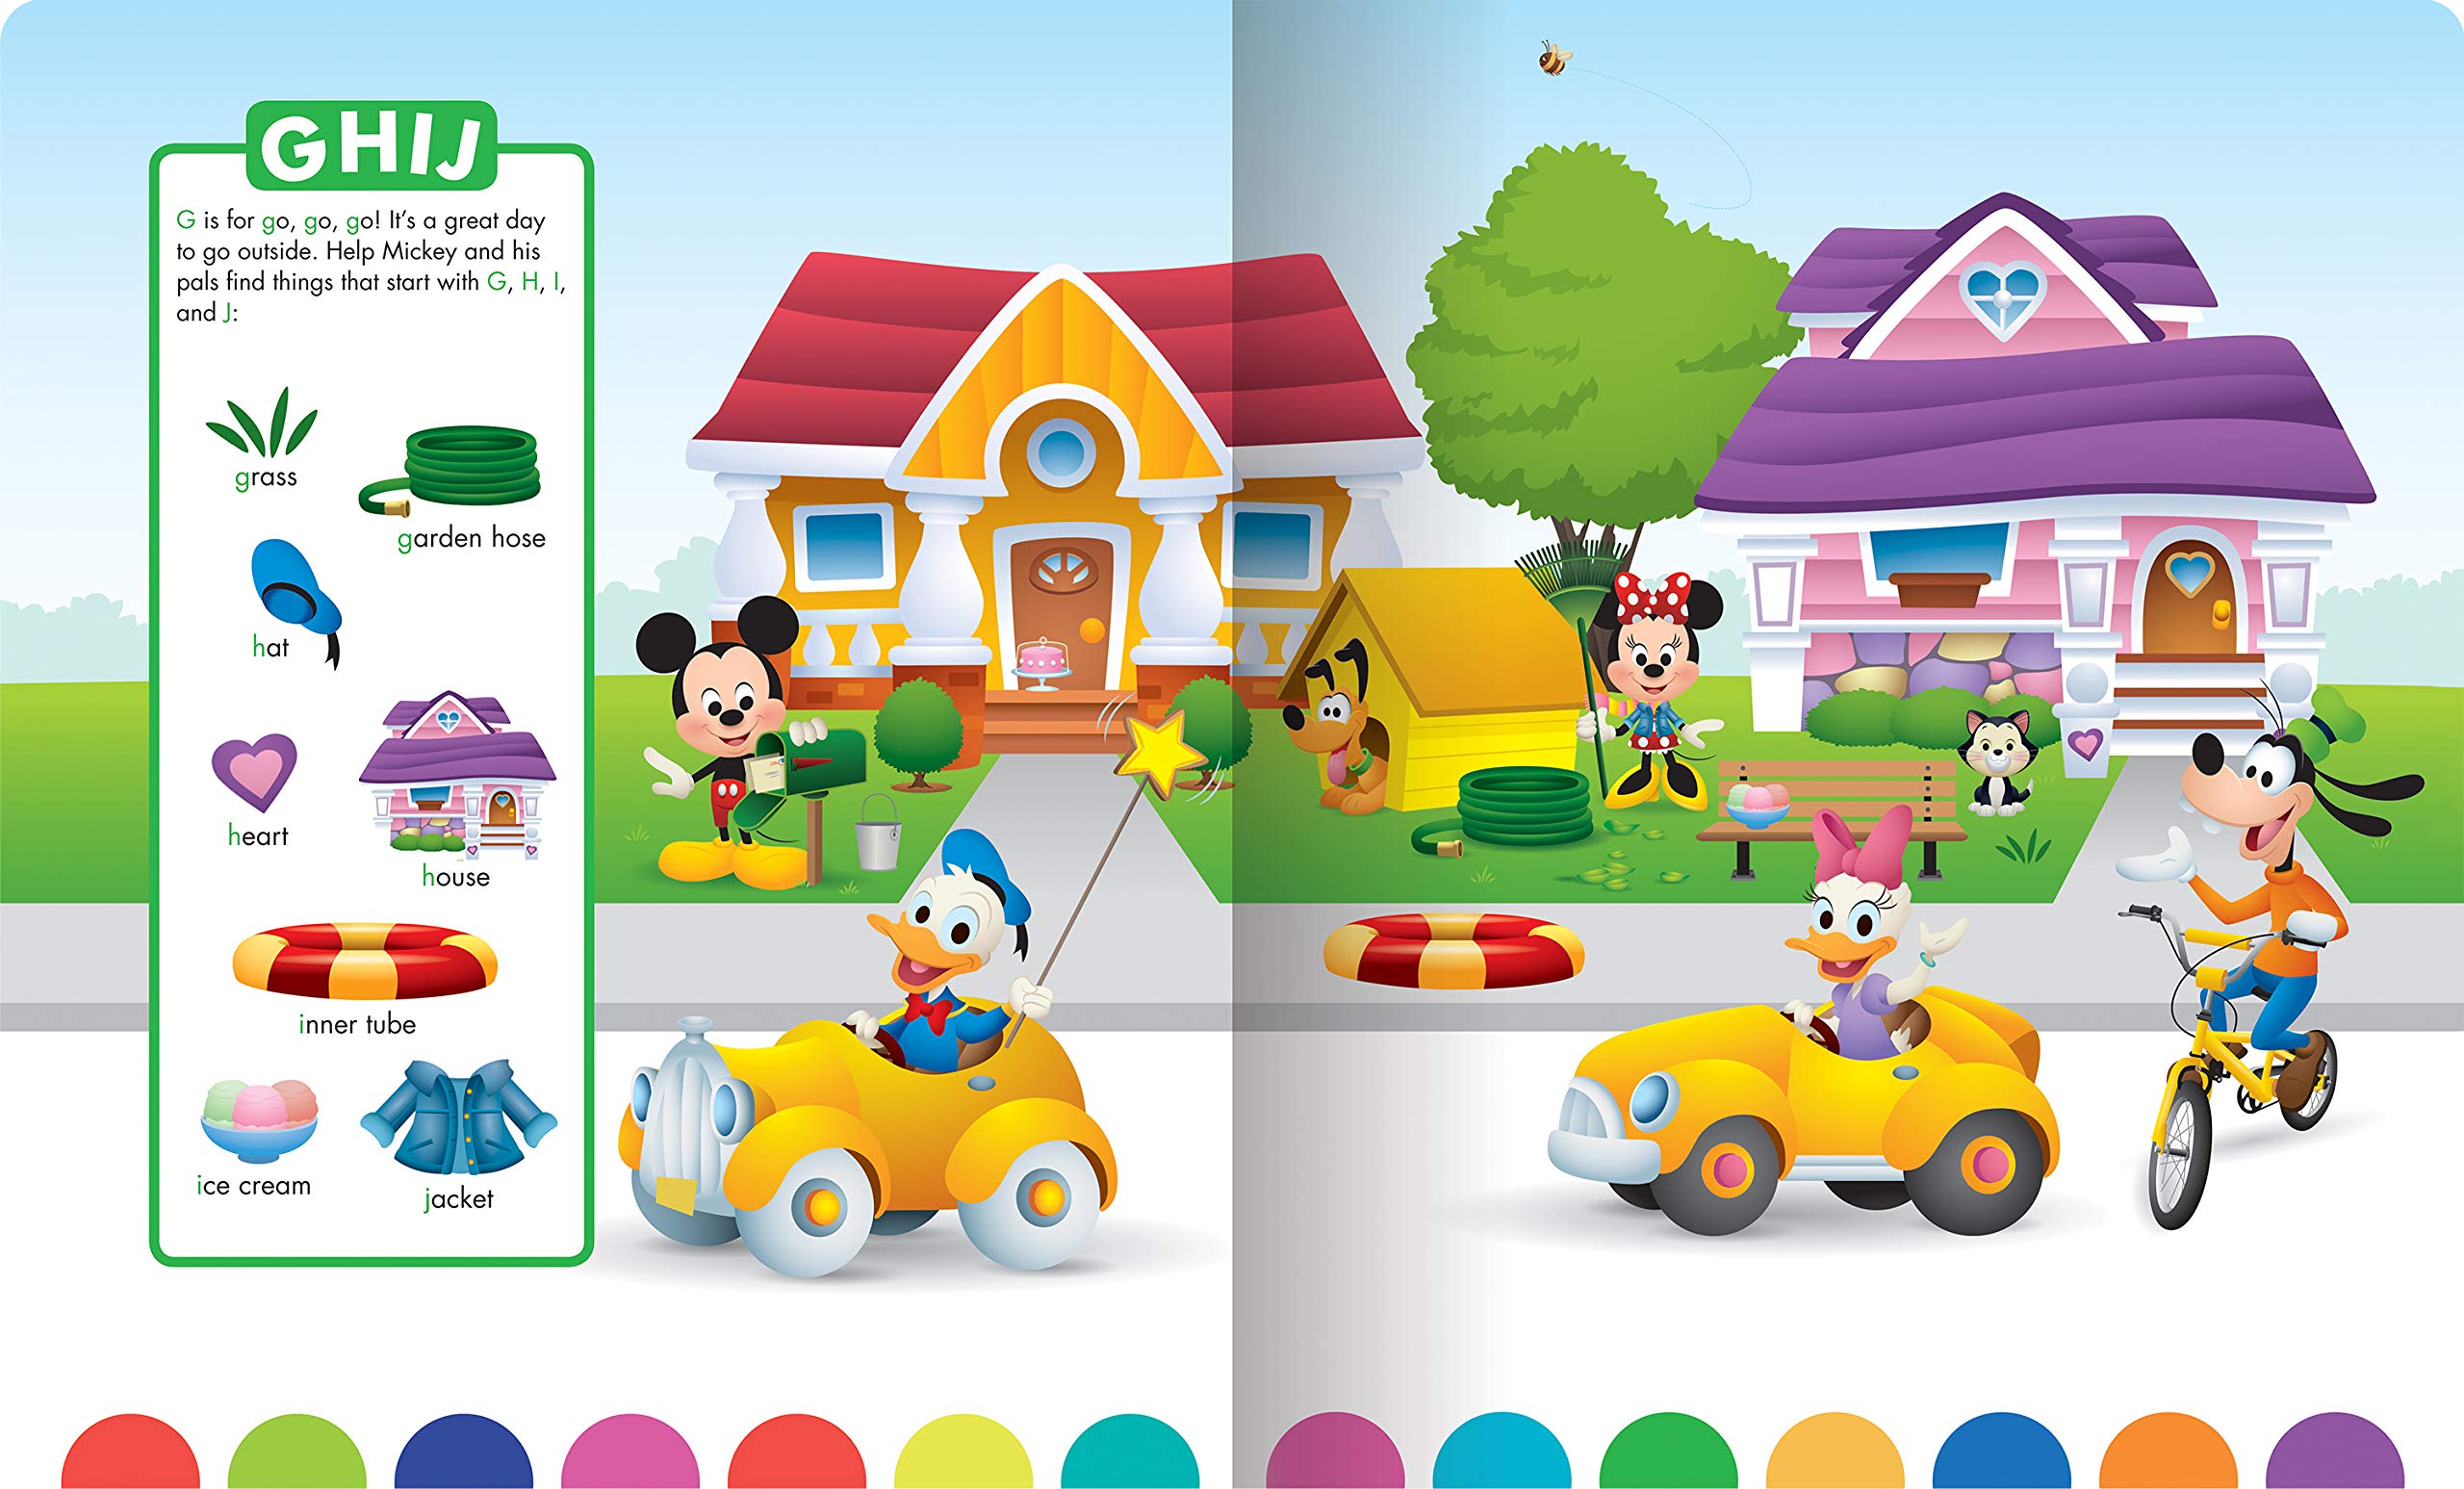 Puzzle Mickey Minnie and Friends DISNEY Junior KING - 50 pièces